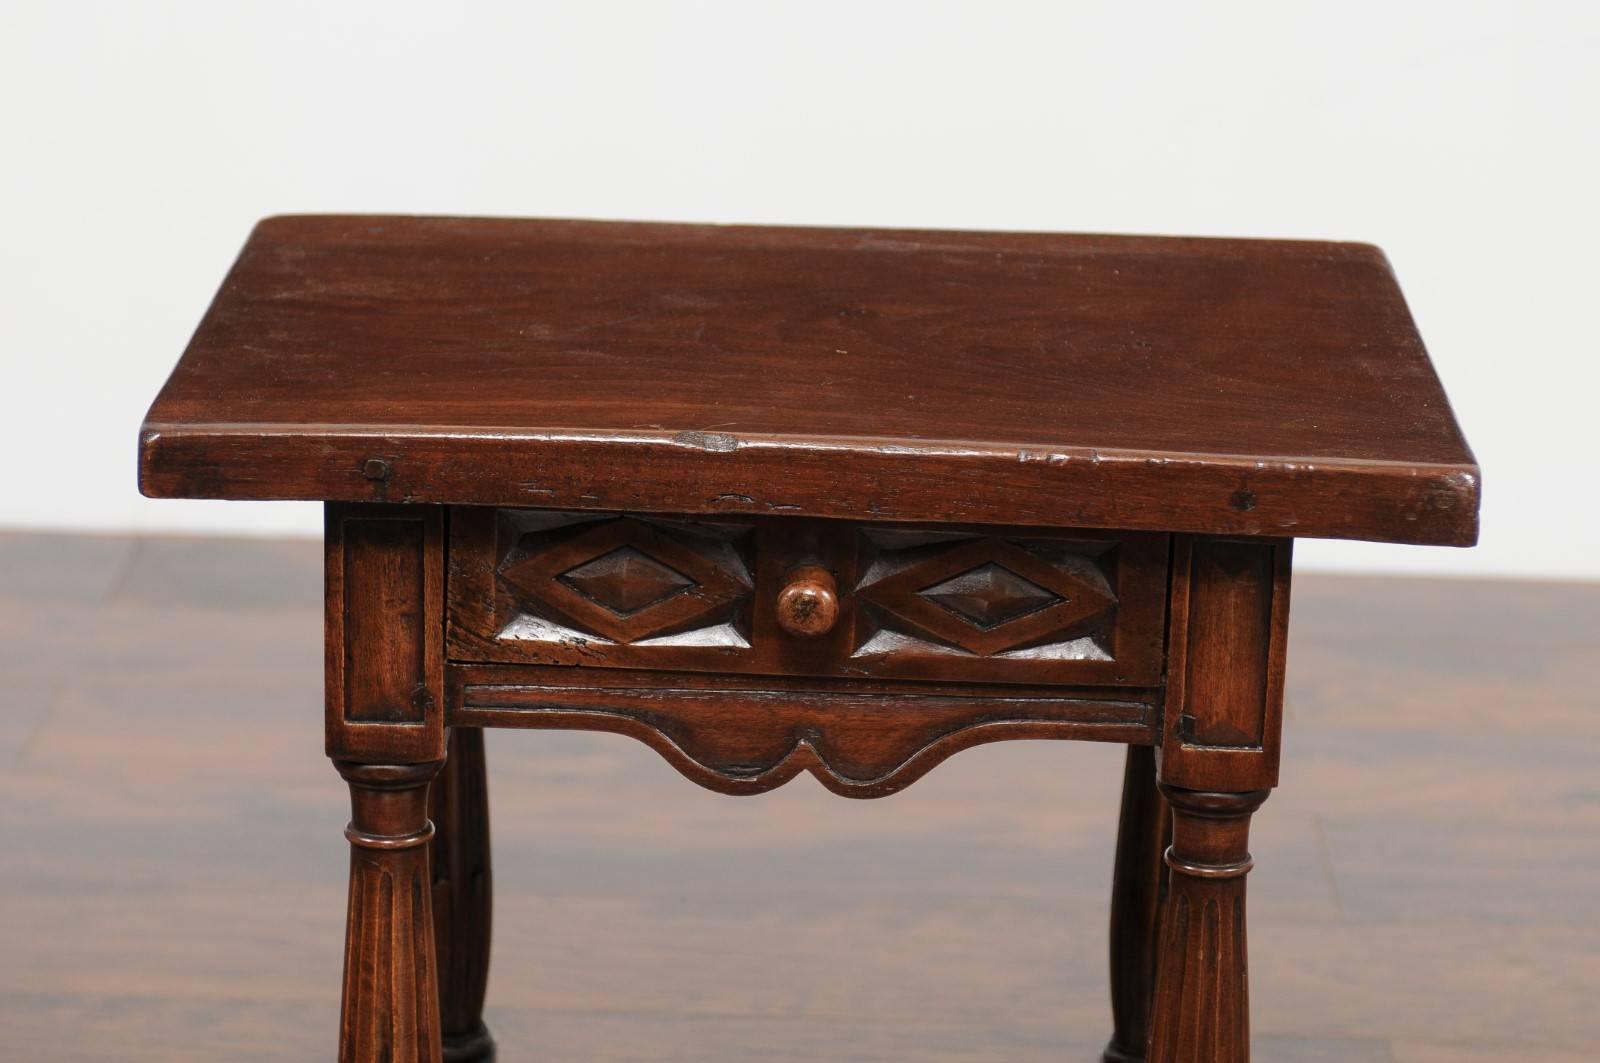 Petite Italian Walnut Side Table with Single Drawer and Fluted Legs, circa 1870 For Sale 6